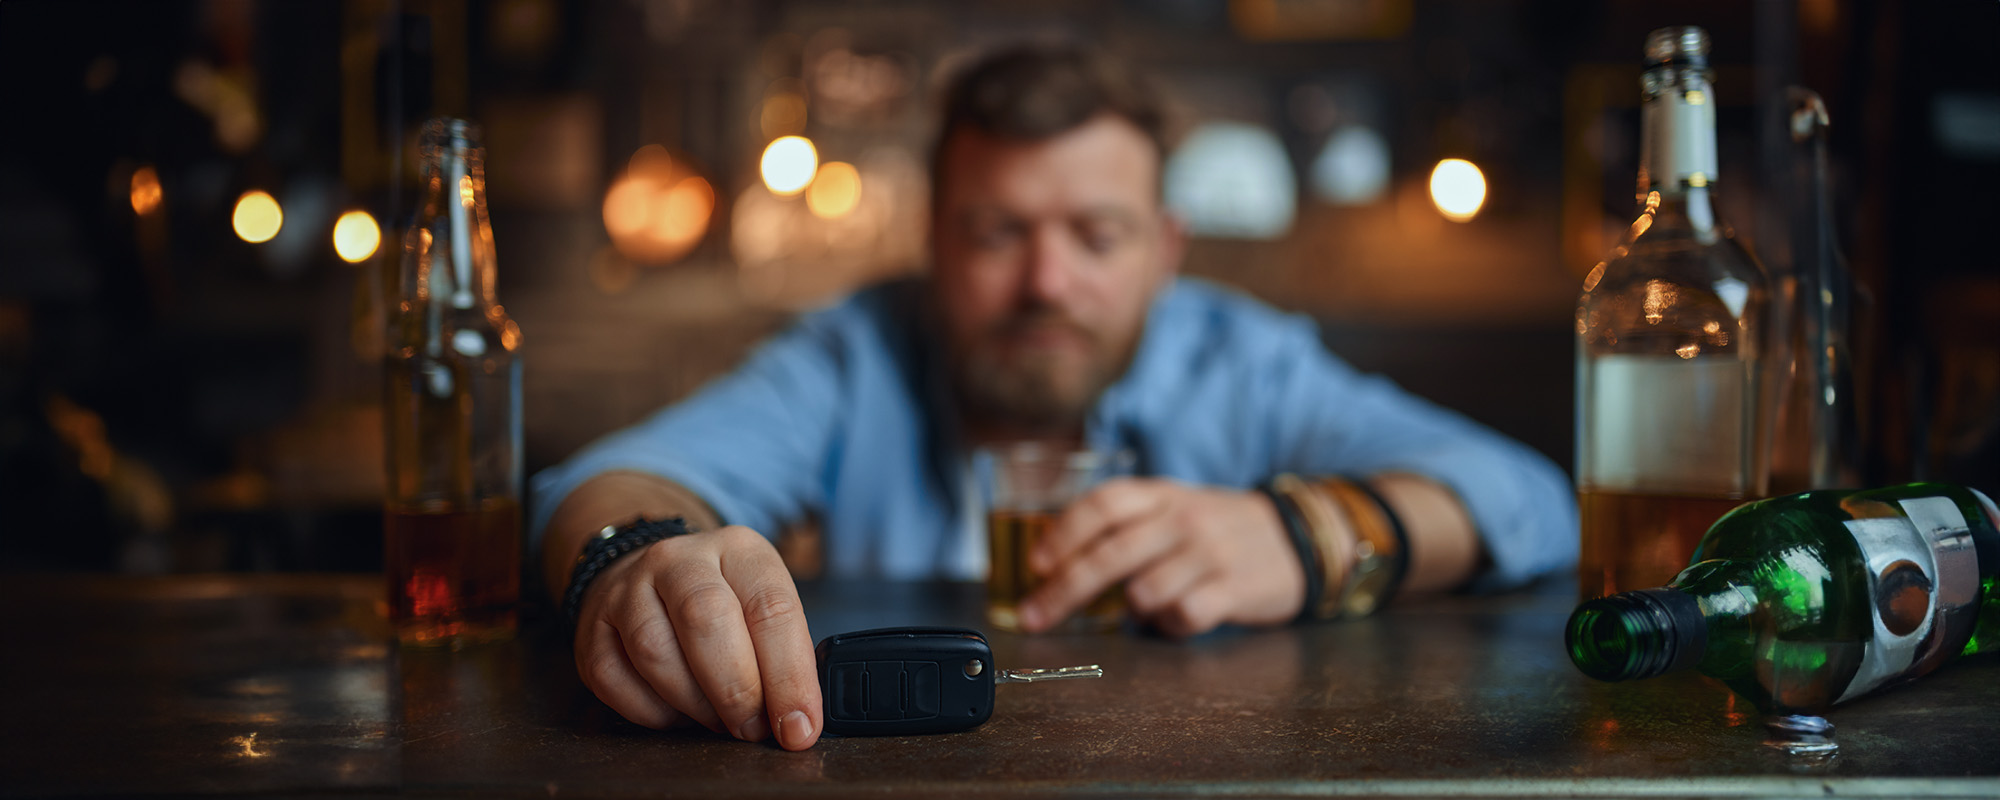 drunk man with car key sitting at counter in bar